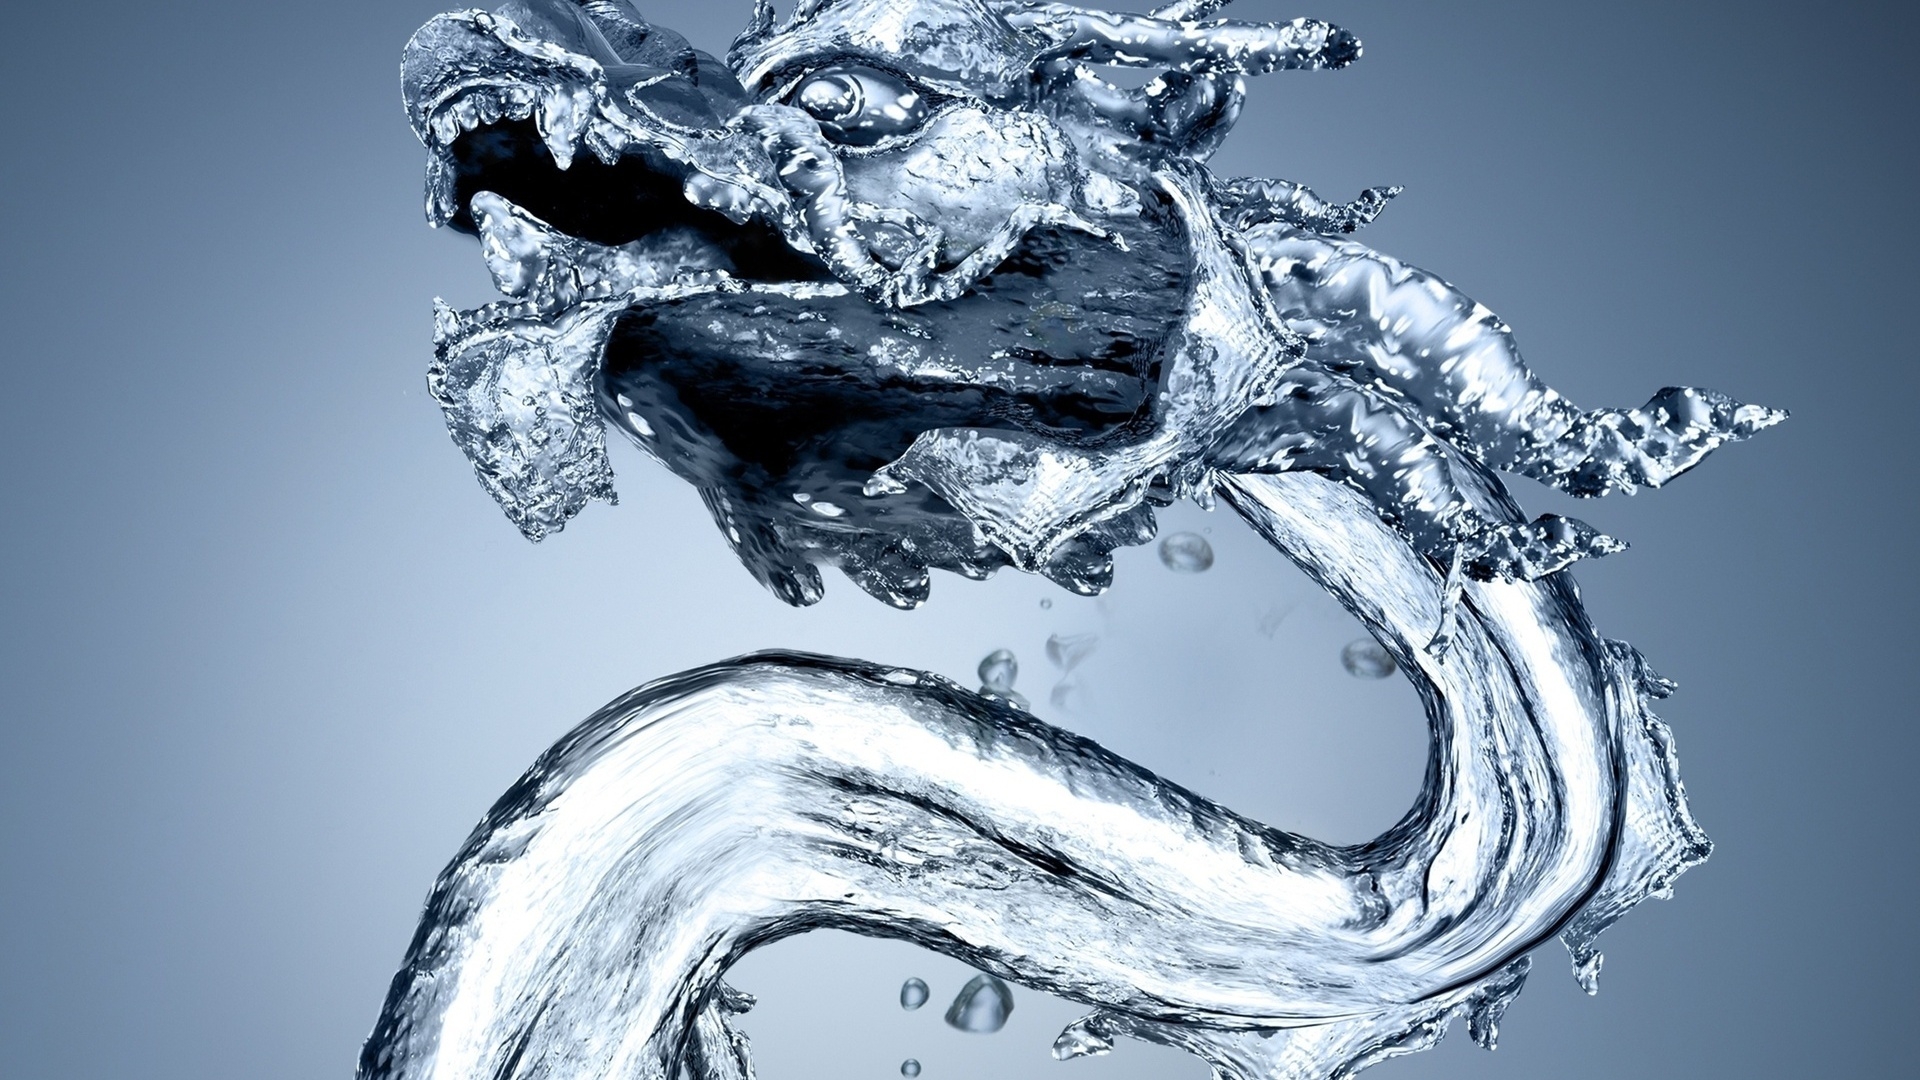 Water Dragon for 1920 x 1080 HDTV 1080p resolution